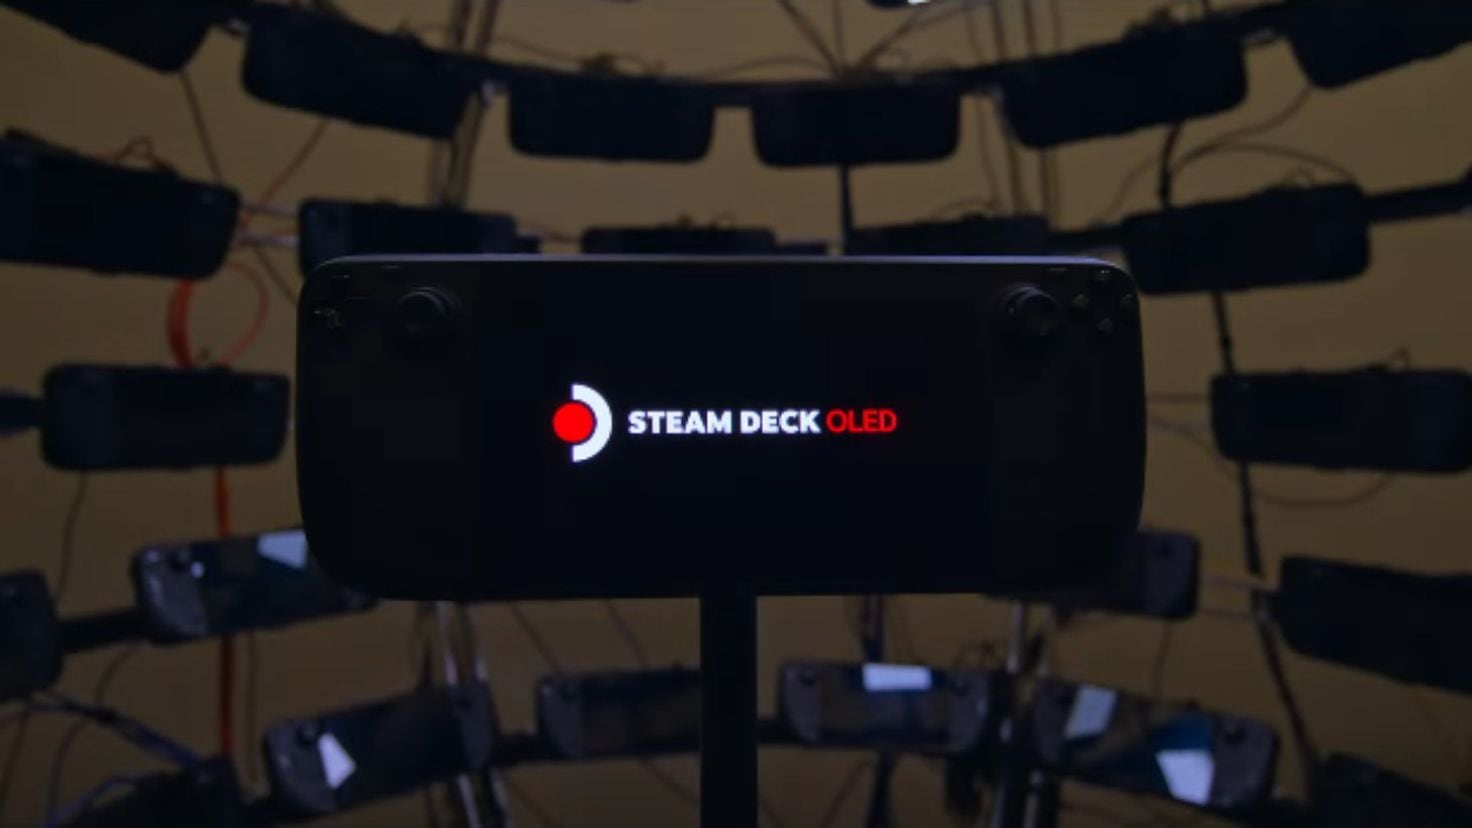 Introducing Steam Deck OLED